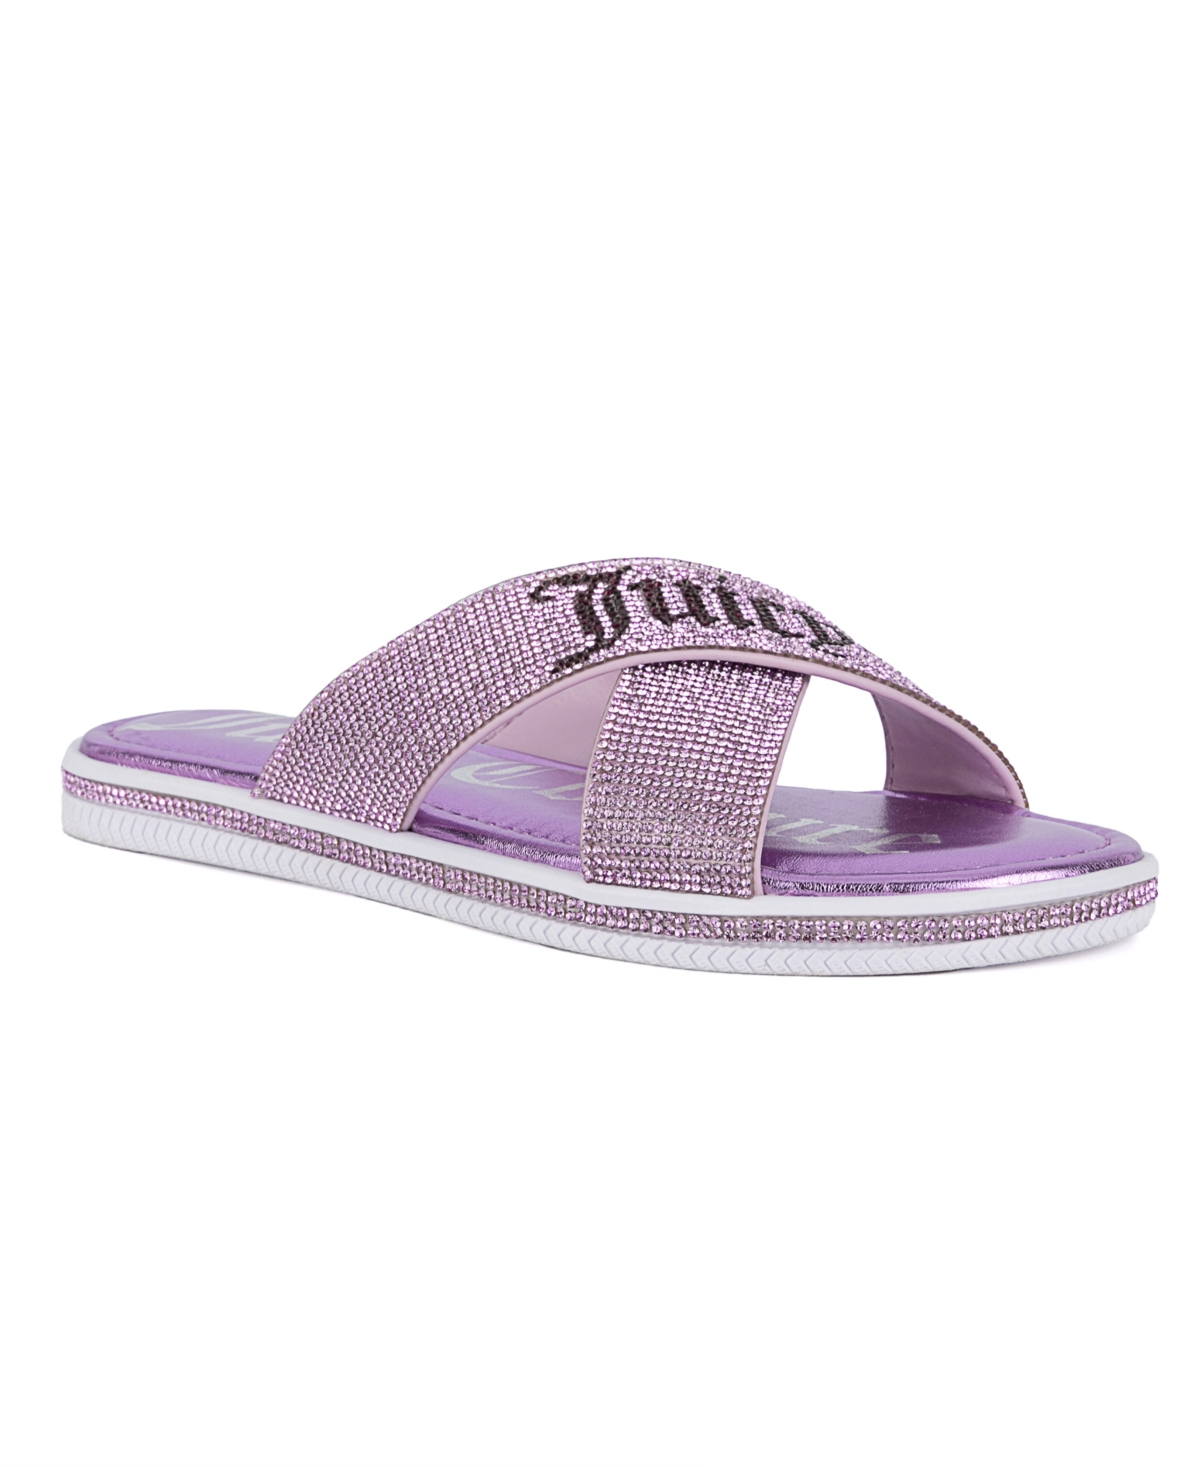 Shop Juicy Couture Women's Yorri Slip On Sparkly Cross-band Flat Sandals In Lavender